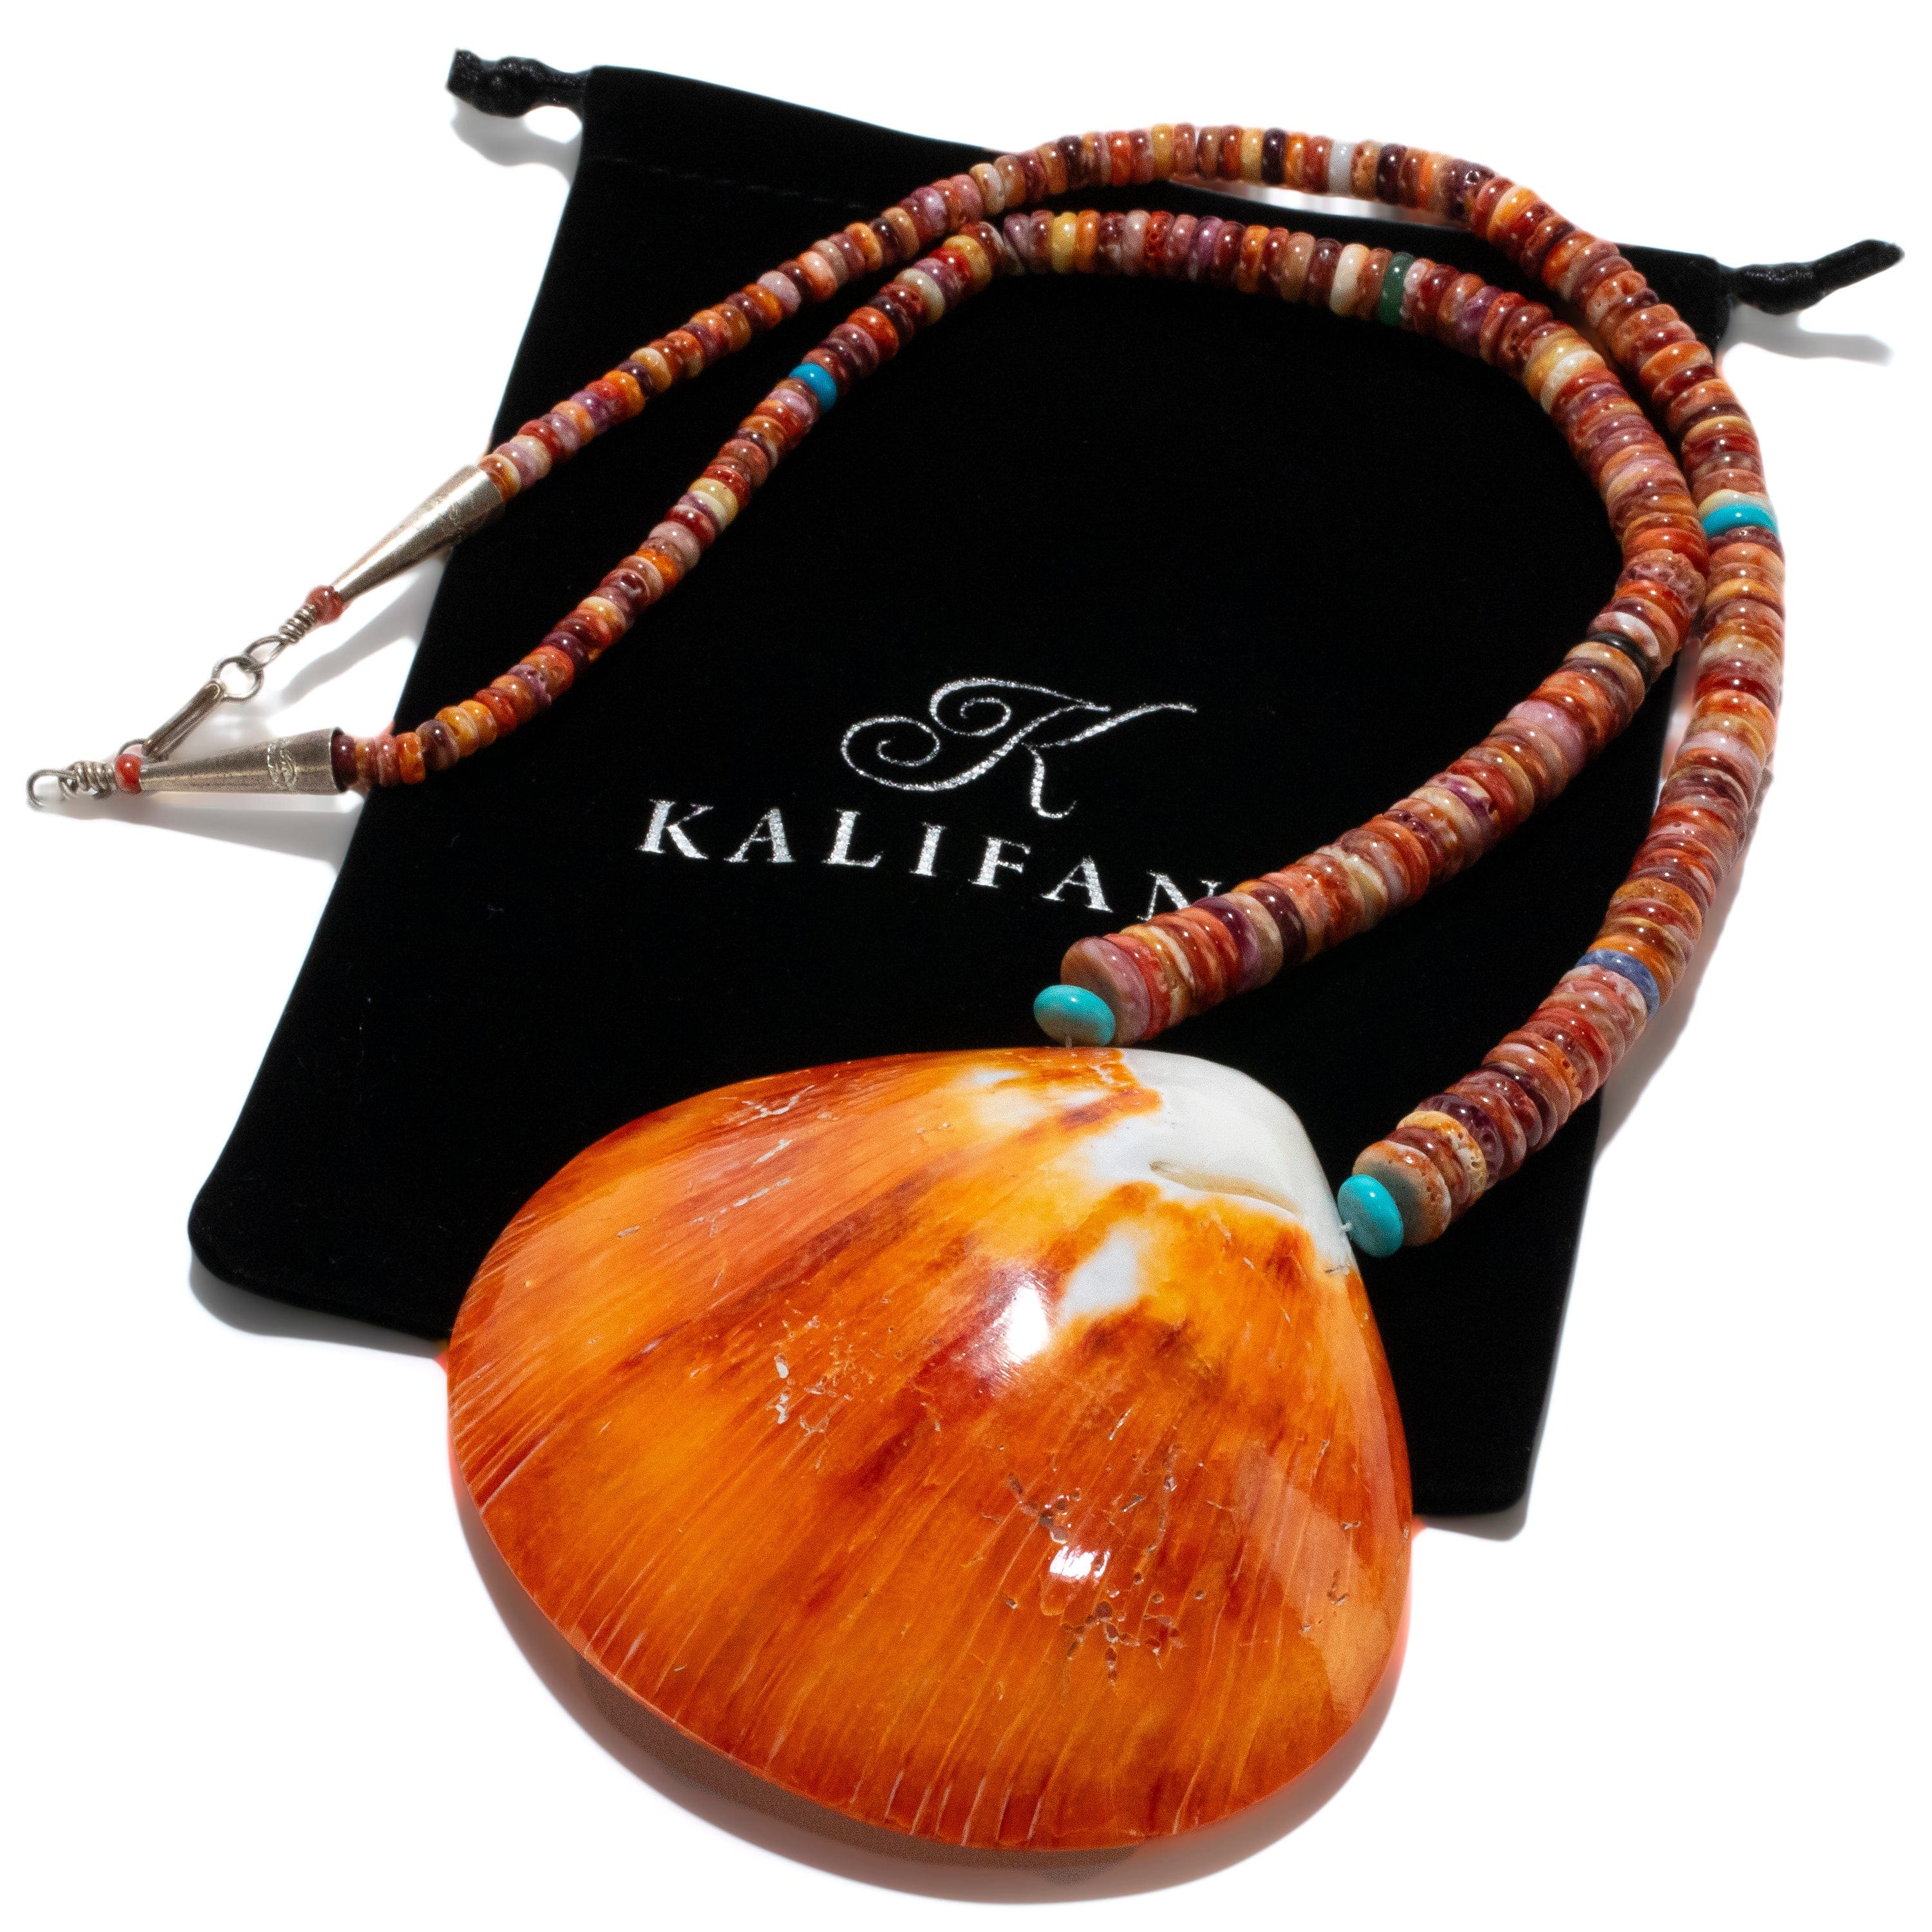 Kalifano Native American Jewelry 26" Orange Spiny Oyster Shell & Turquoise USA Native American Made 925 Sterling Silver Heishi Bead Necklace NAN1200.022